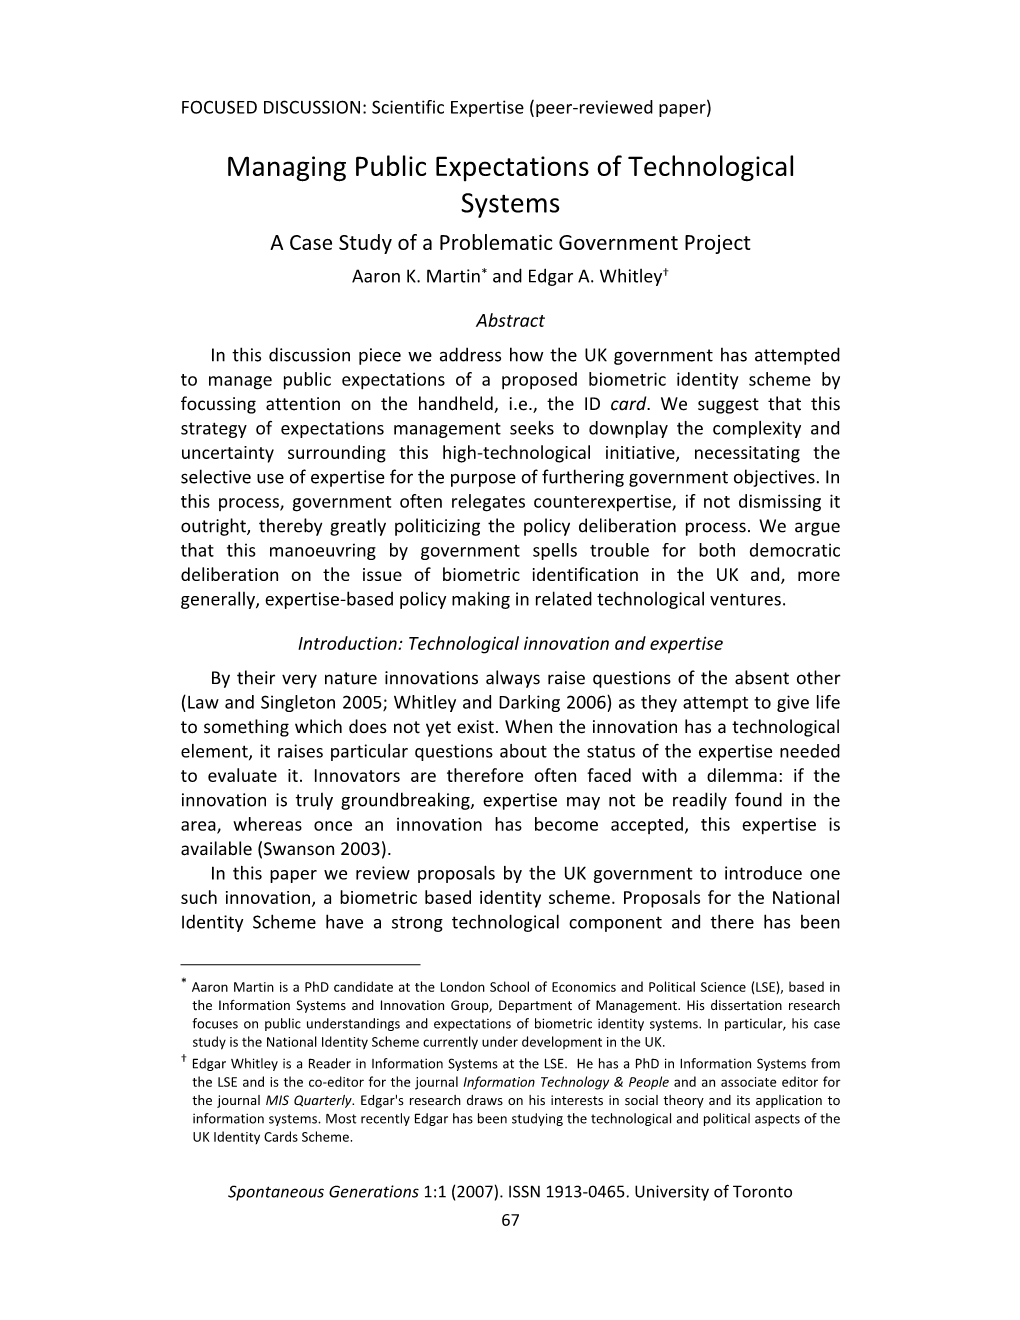 Managing Public Expectations of Technological Systems a Case Study of a Problematic Government Project Aaron K